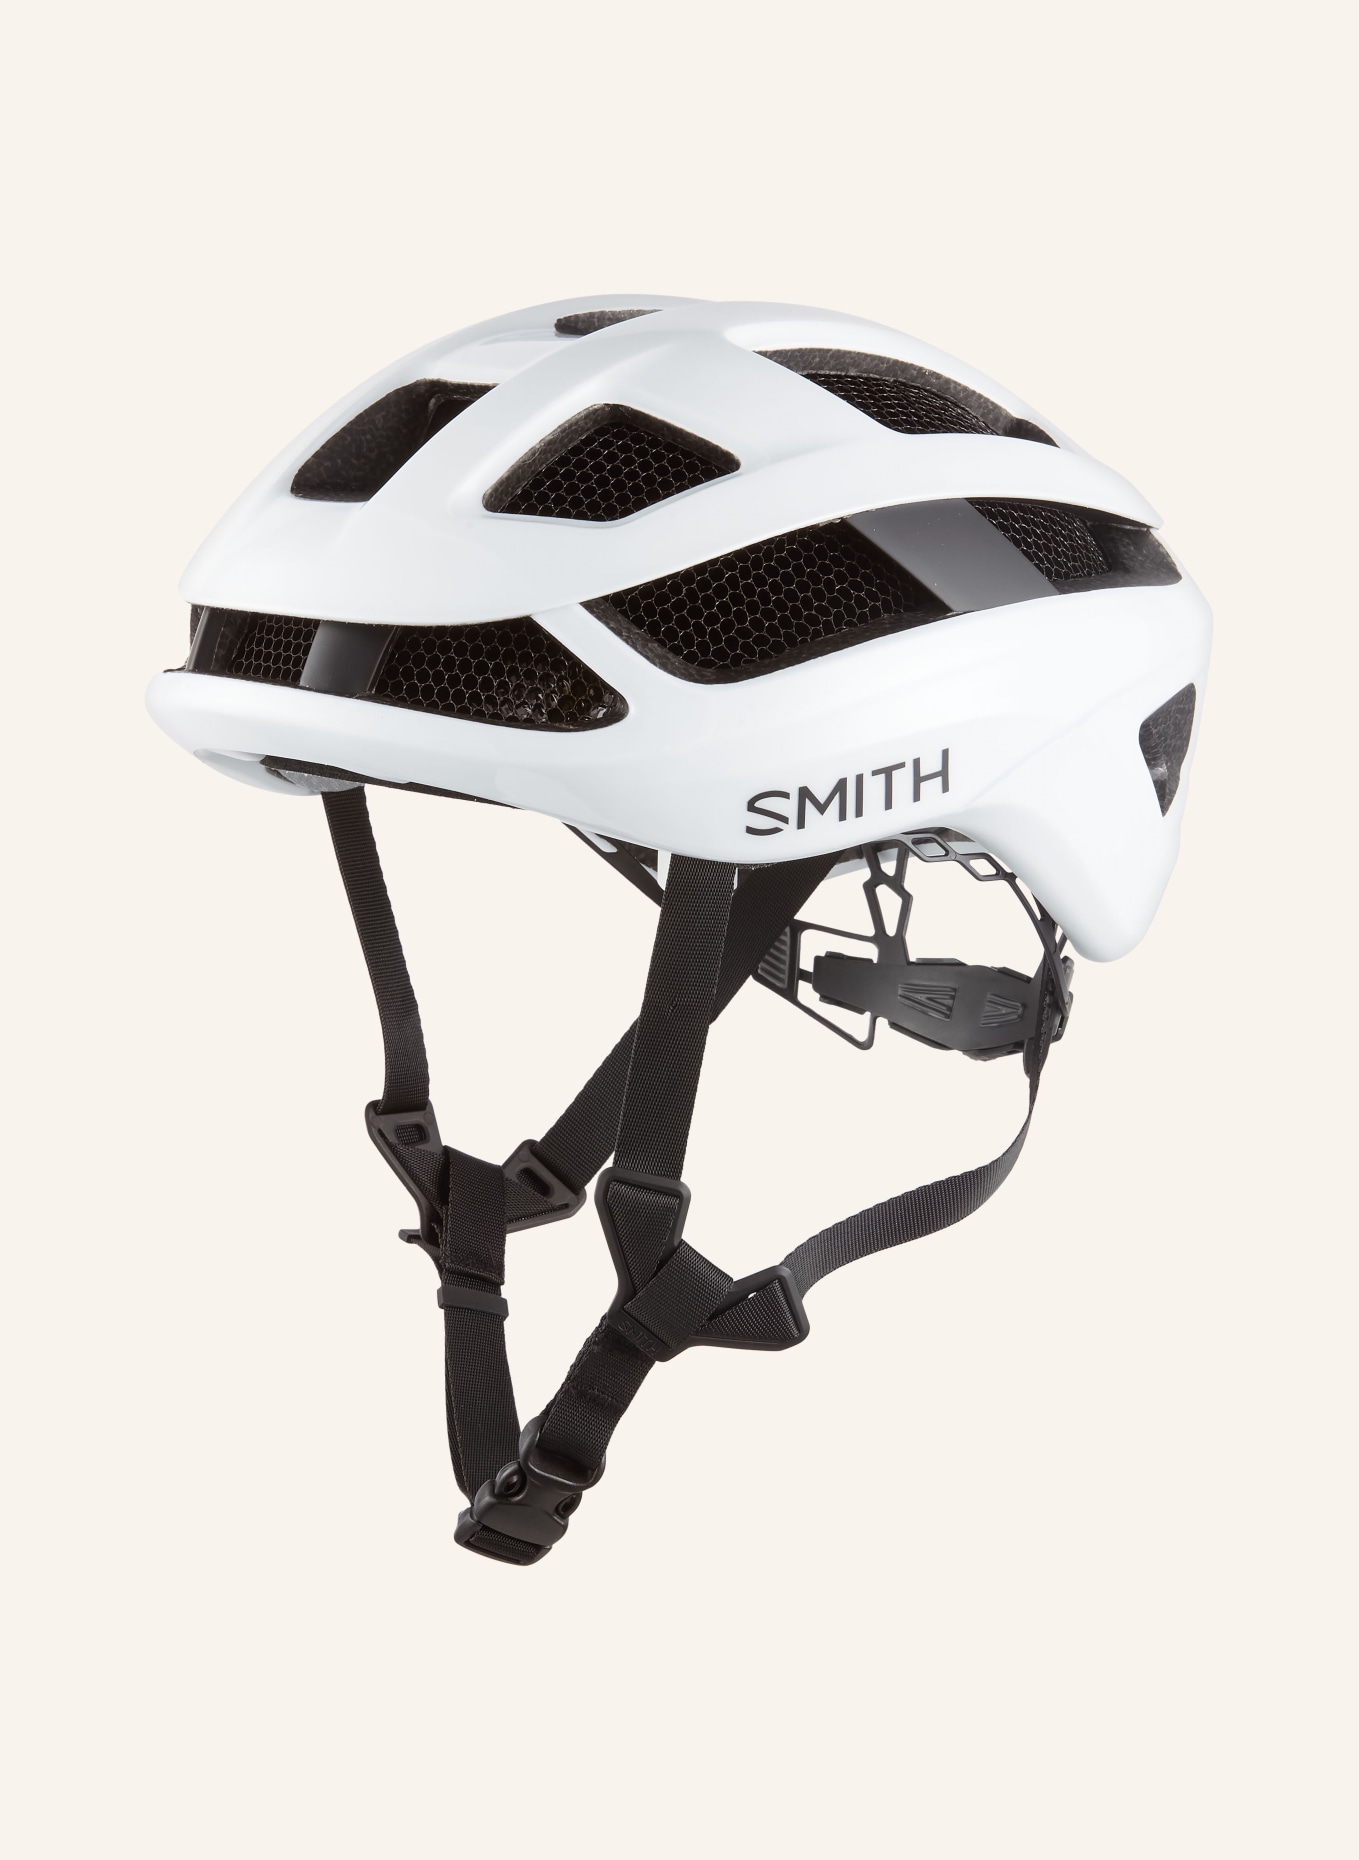 SMITH Fahrradhelm TRACE MIPS, Farbe: WEISS (Bild 1)